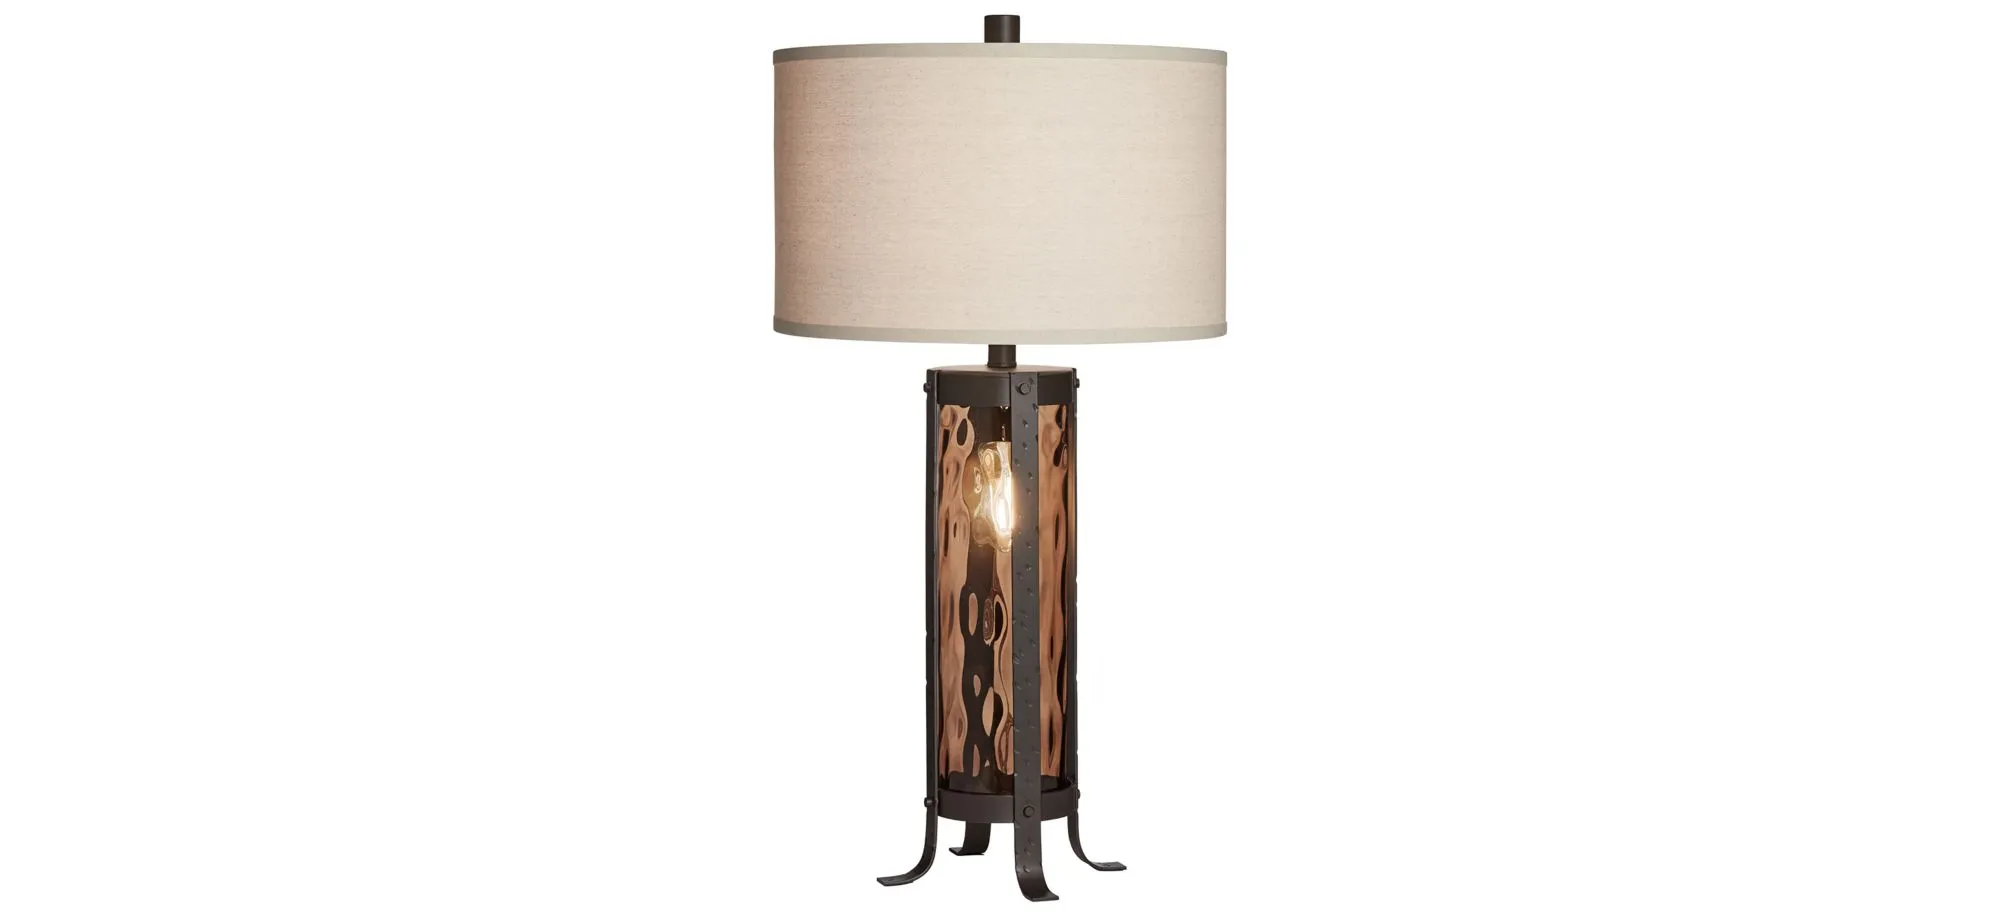 Ashford Table Lamp in Amber by Pacific Coast